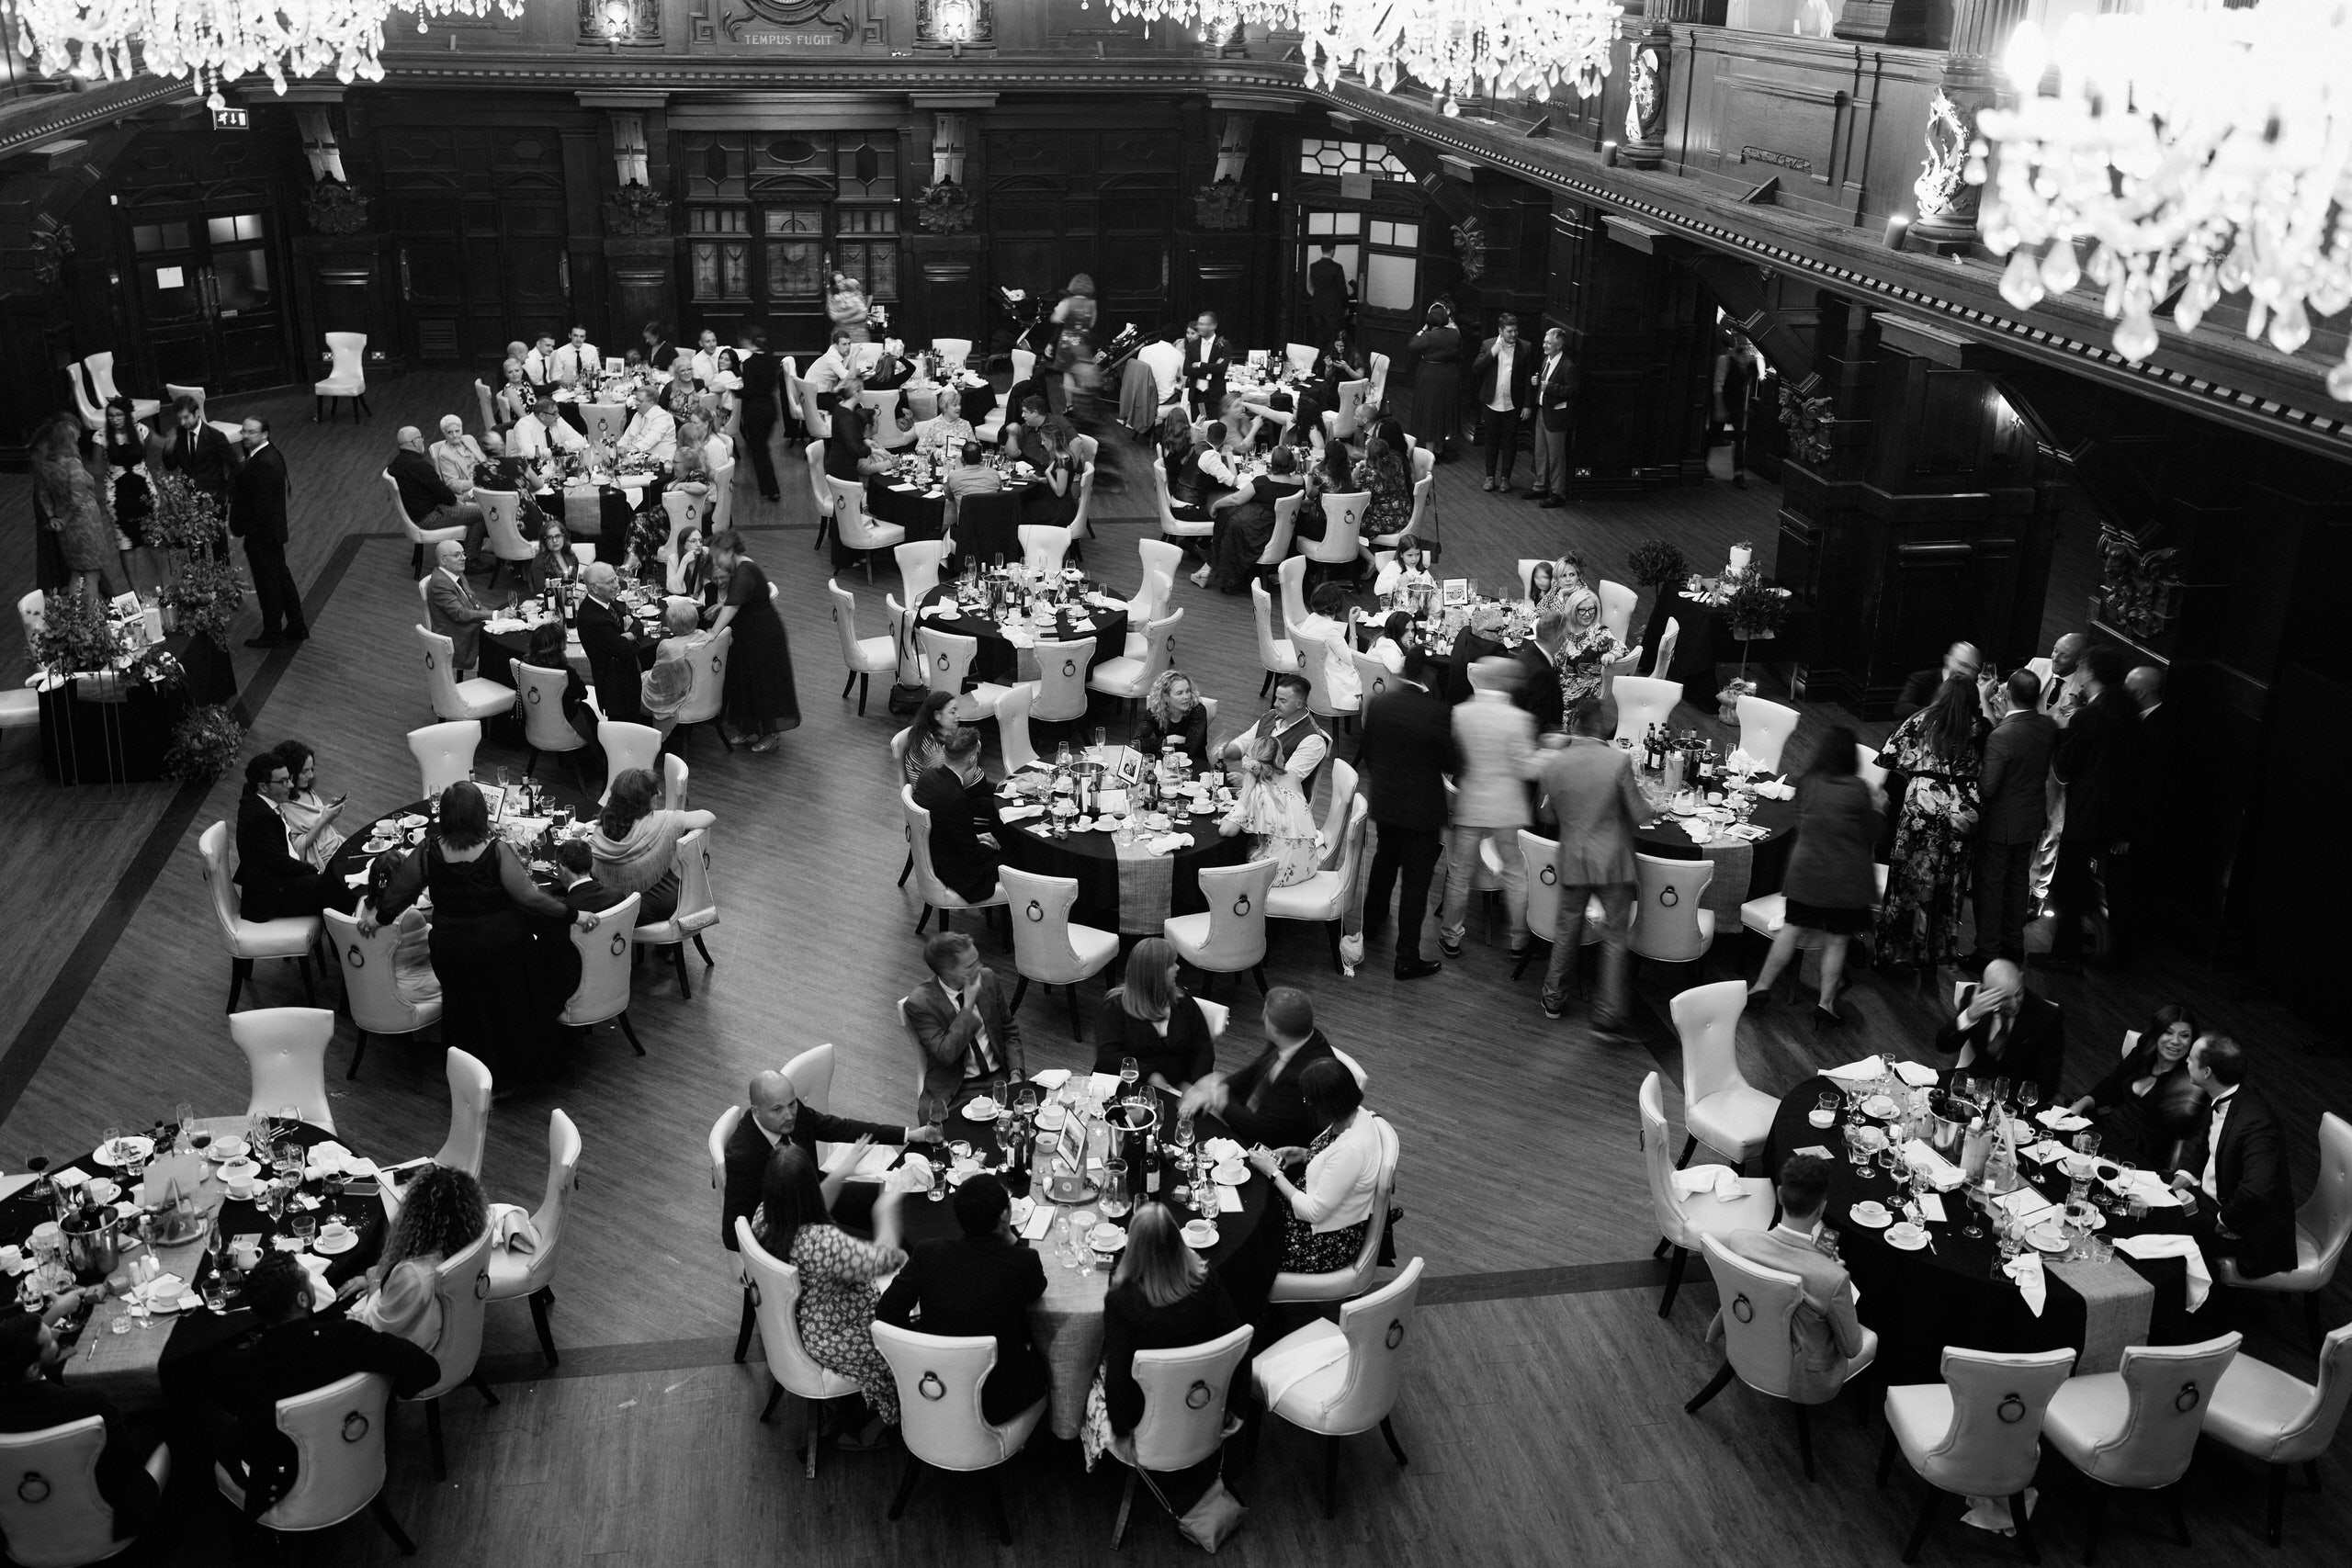 A wedding reception picture in black and white.